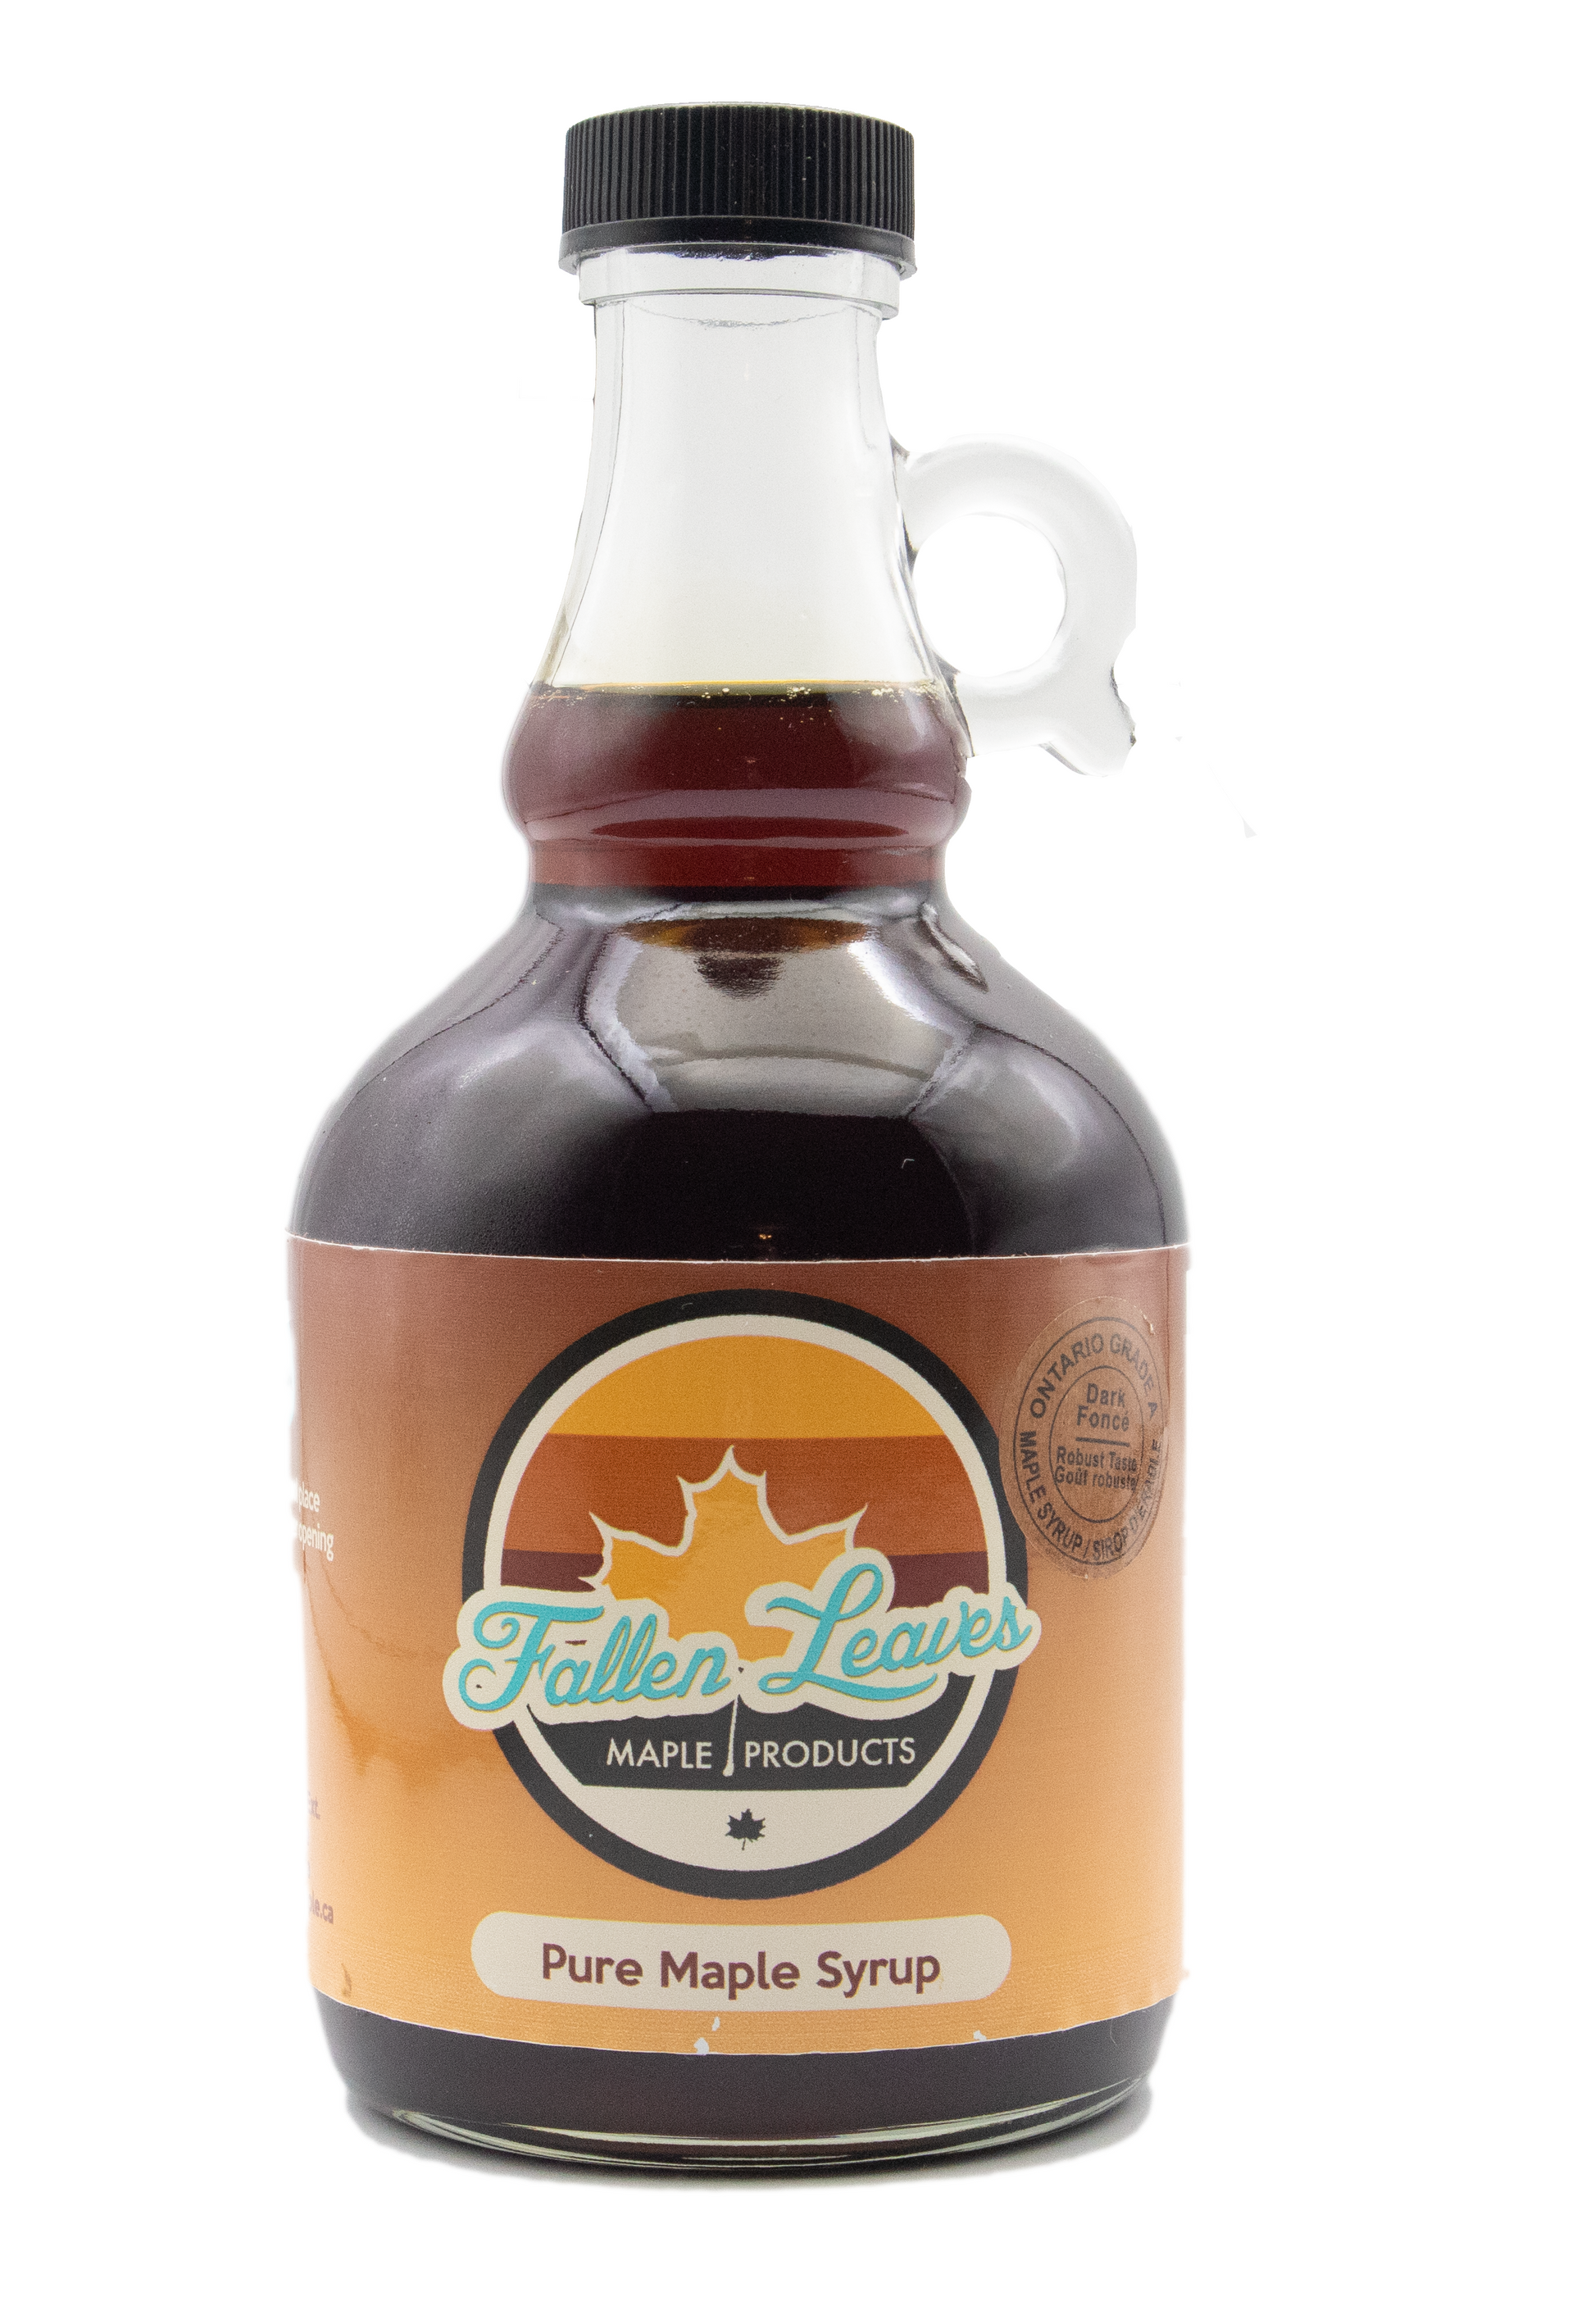 Dark Grade - 100% Pure Maple Syrup Fallen Leaves Maple Products